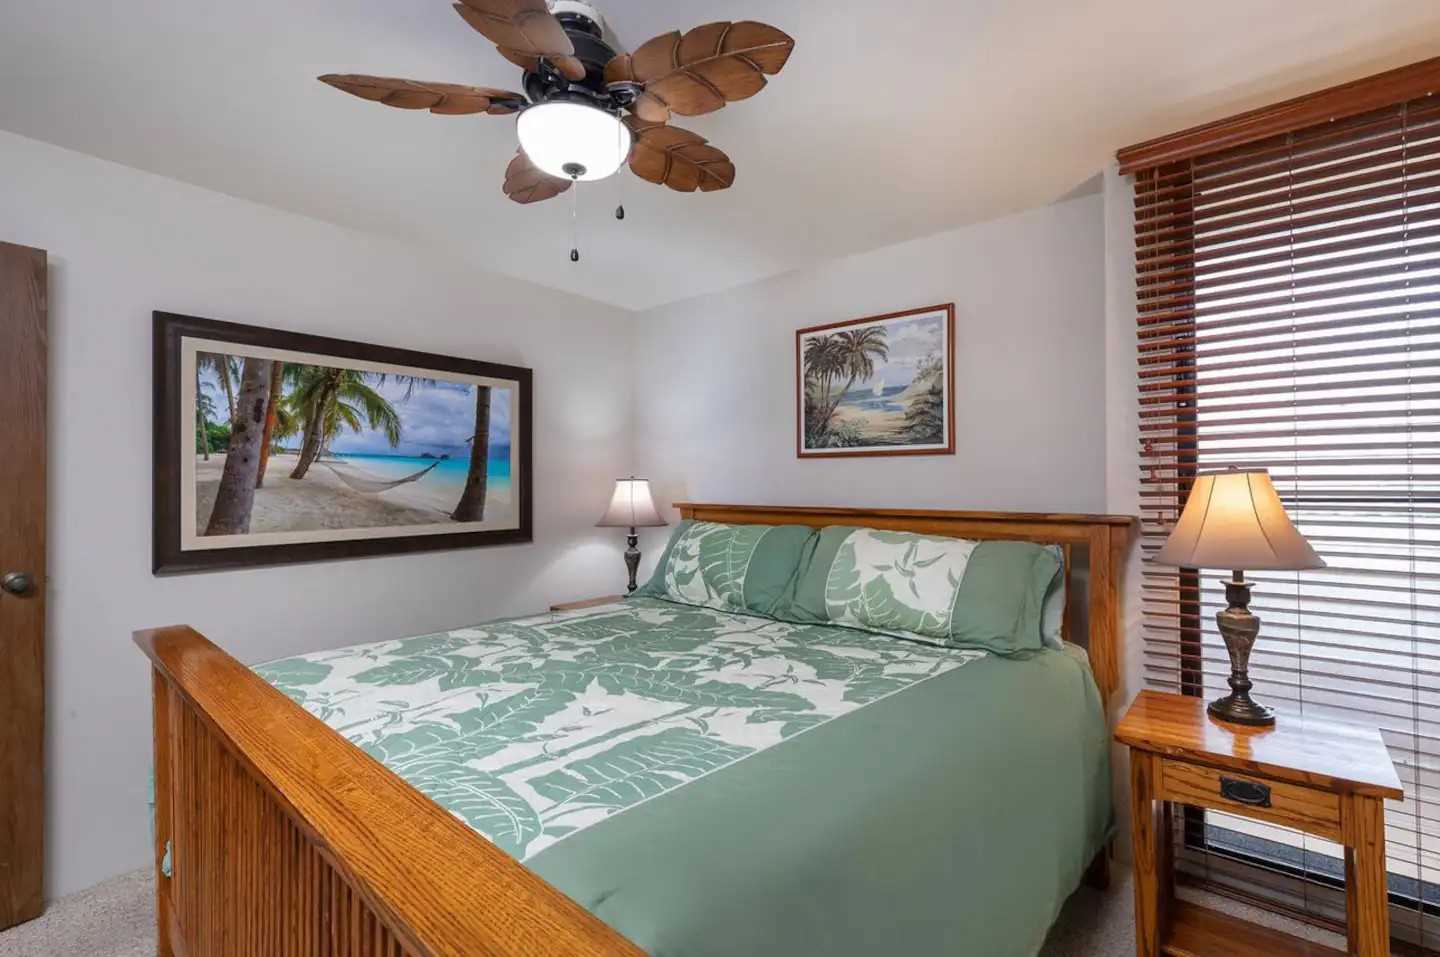 Comfortable newer California King Bed. Ceiling fan and louve